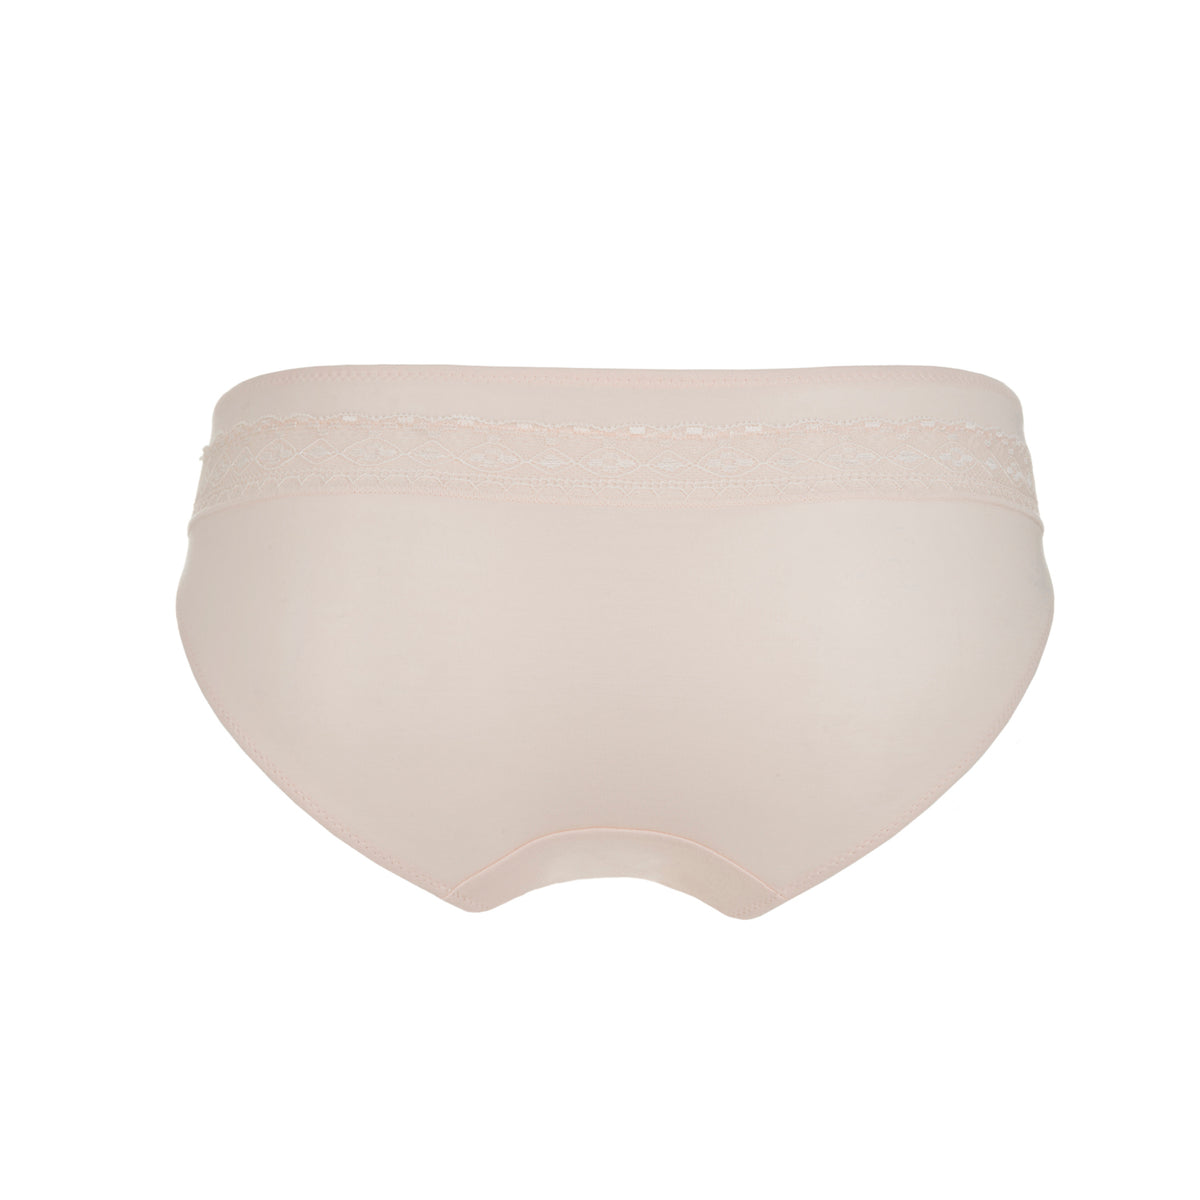 Pure Silk and Organic Cotton Lingerie- Sunbleached Brief Panty